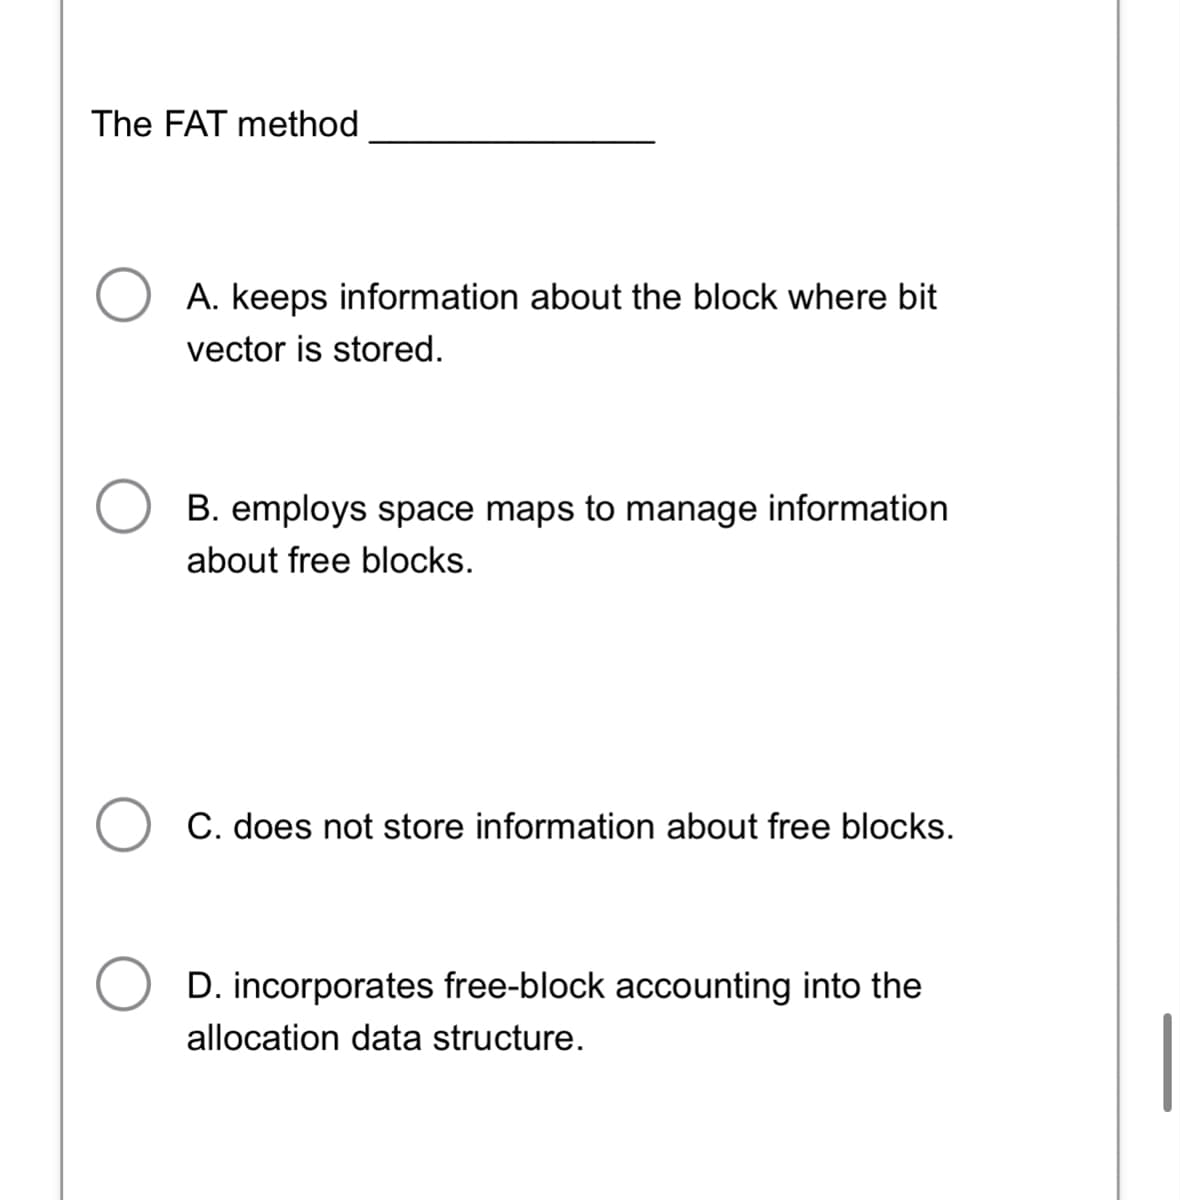 The FAT method
A. keeps information about the block where bit
vector is stored.
B. employs space maps to manage information
about free blocks.
C. does not store information about free blocks.
D. incorporates free-block accounting into the
allocation data structure.